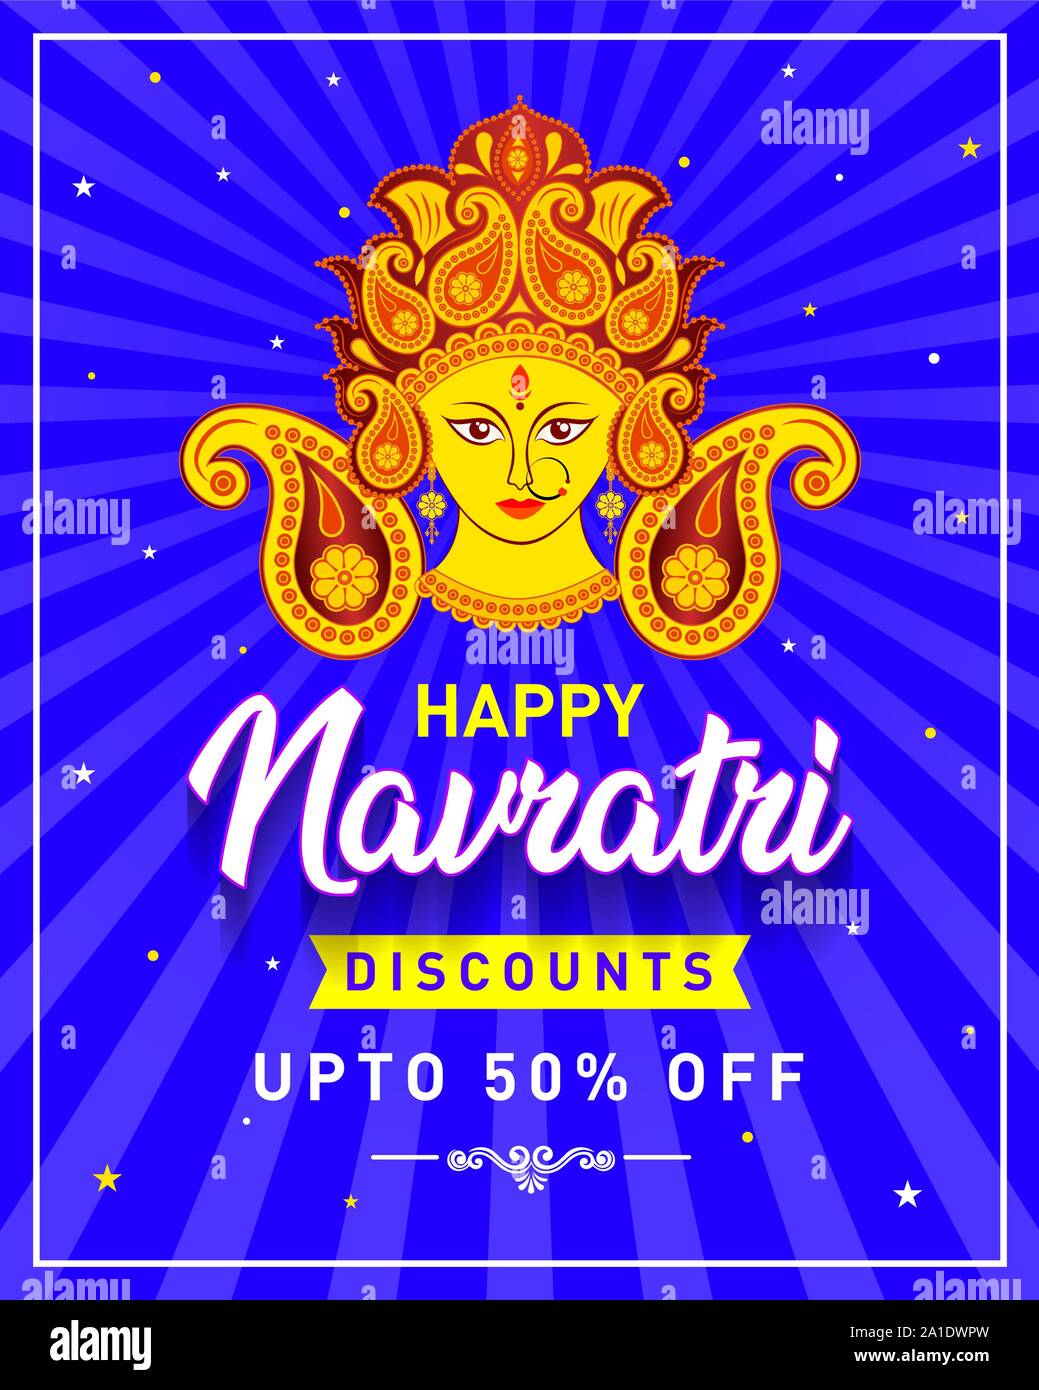 Happy Navratri Discount Upto 50% Off Banner of Indian Festival of Durga Puja Sale Offer Logo, Greeting, Poster Label, Mnemonic on blue rays background Stock Vector